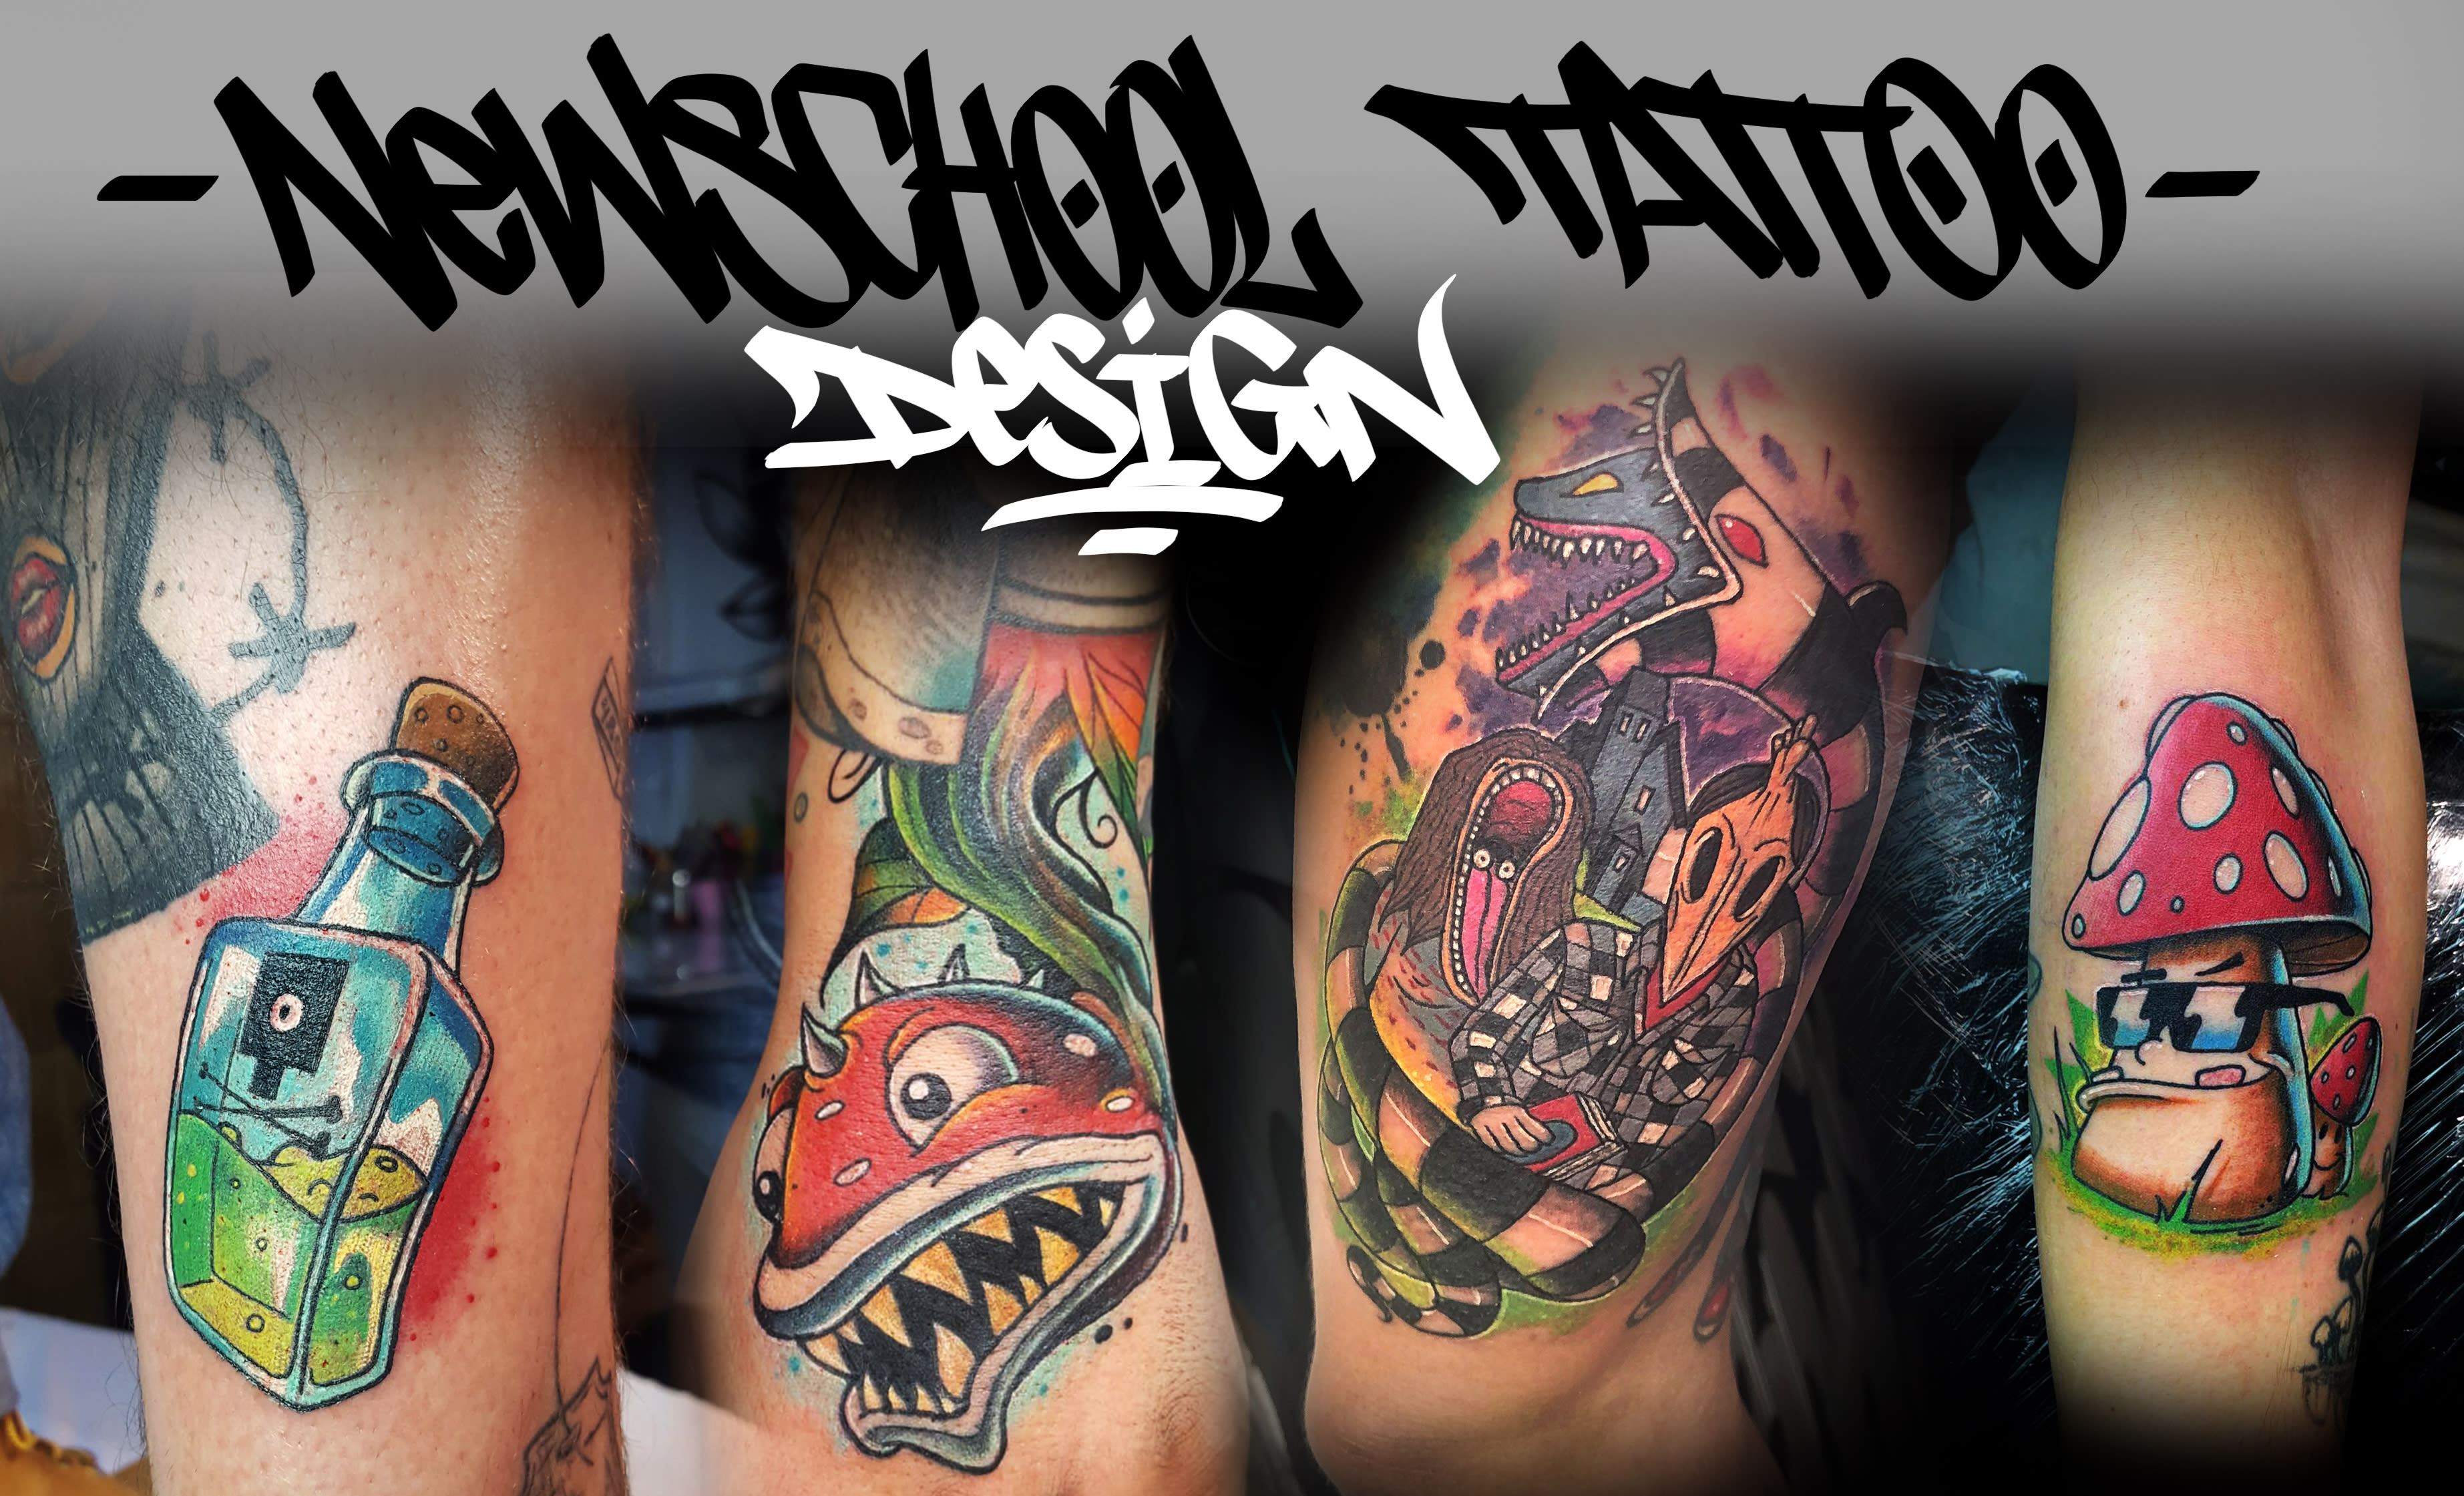 TatMasters  Read everything about New School tattoos